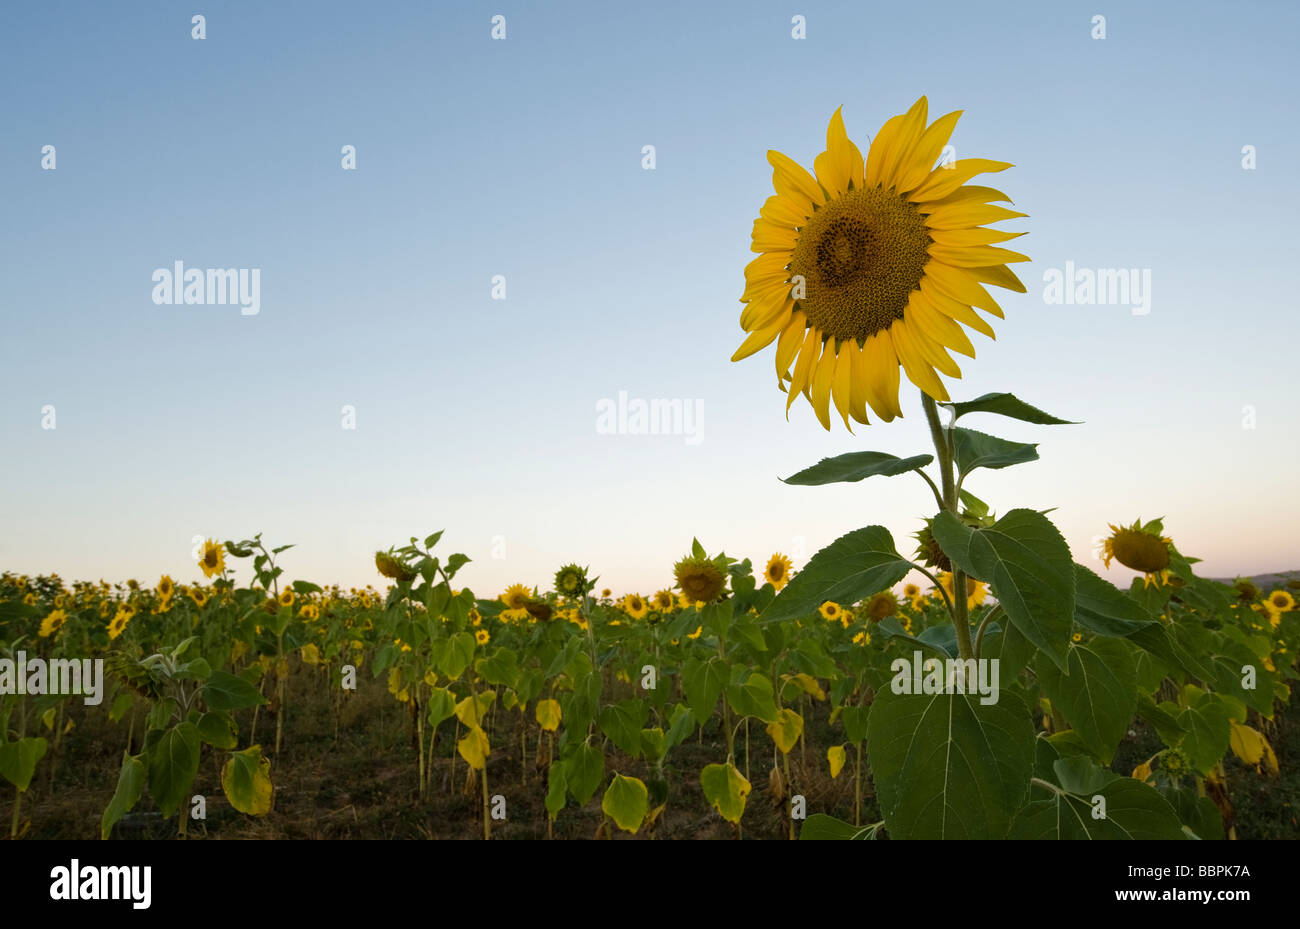 Sunflower field (Helianthus annuus) in the early morning, Free State Province, South Africa Stock Photo